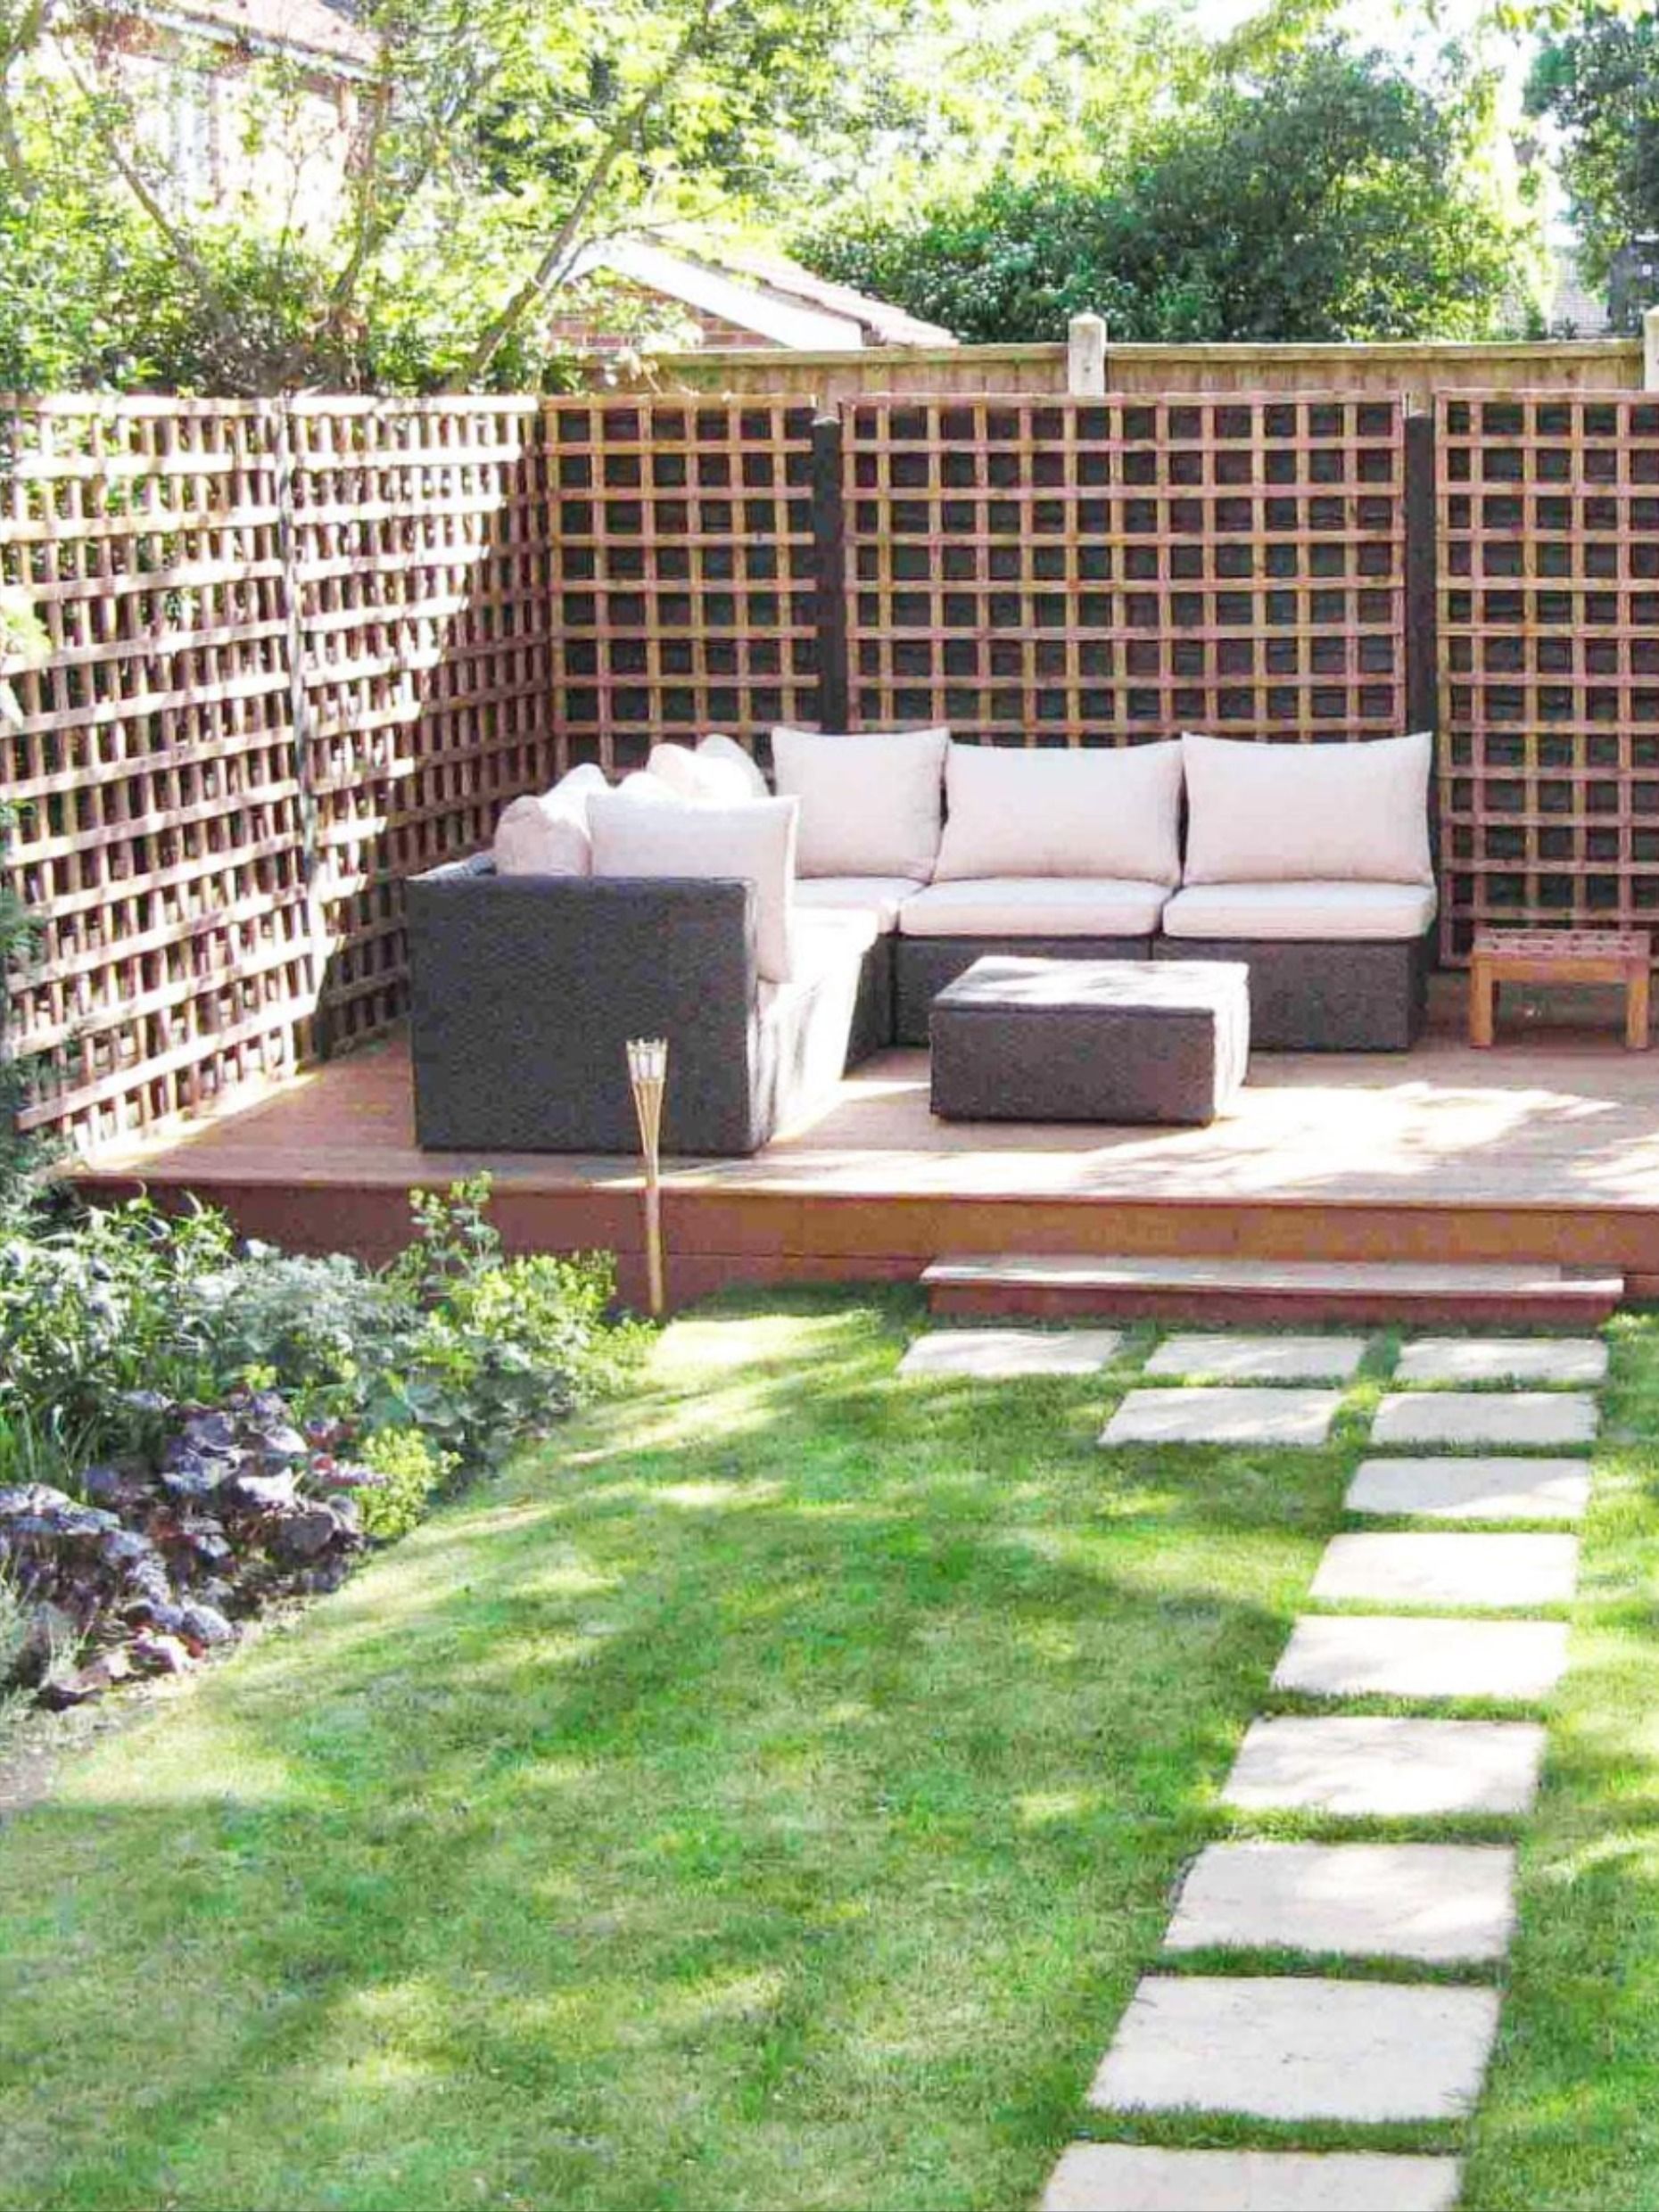 The Beauty and Functionality of Garden Decking